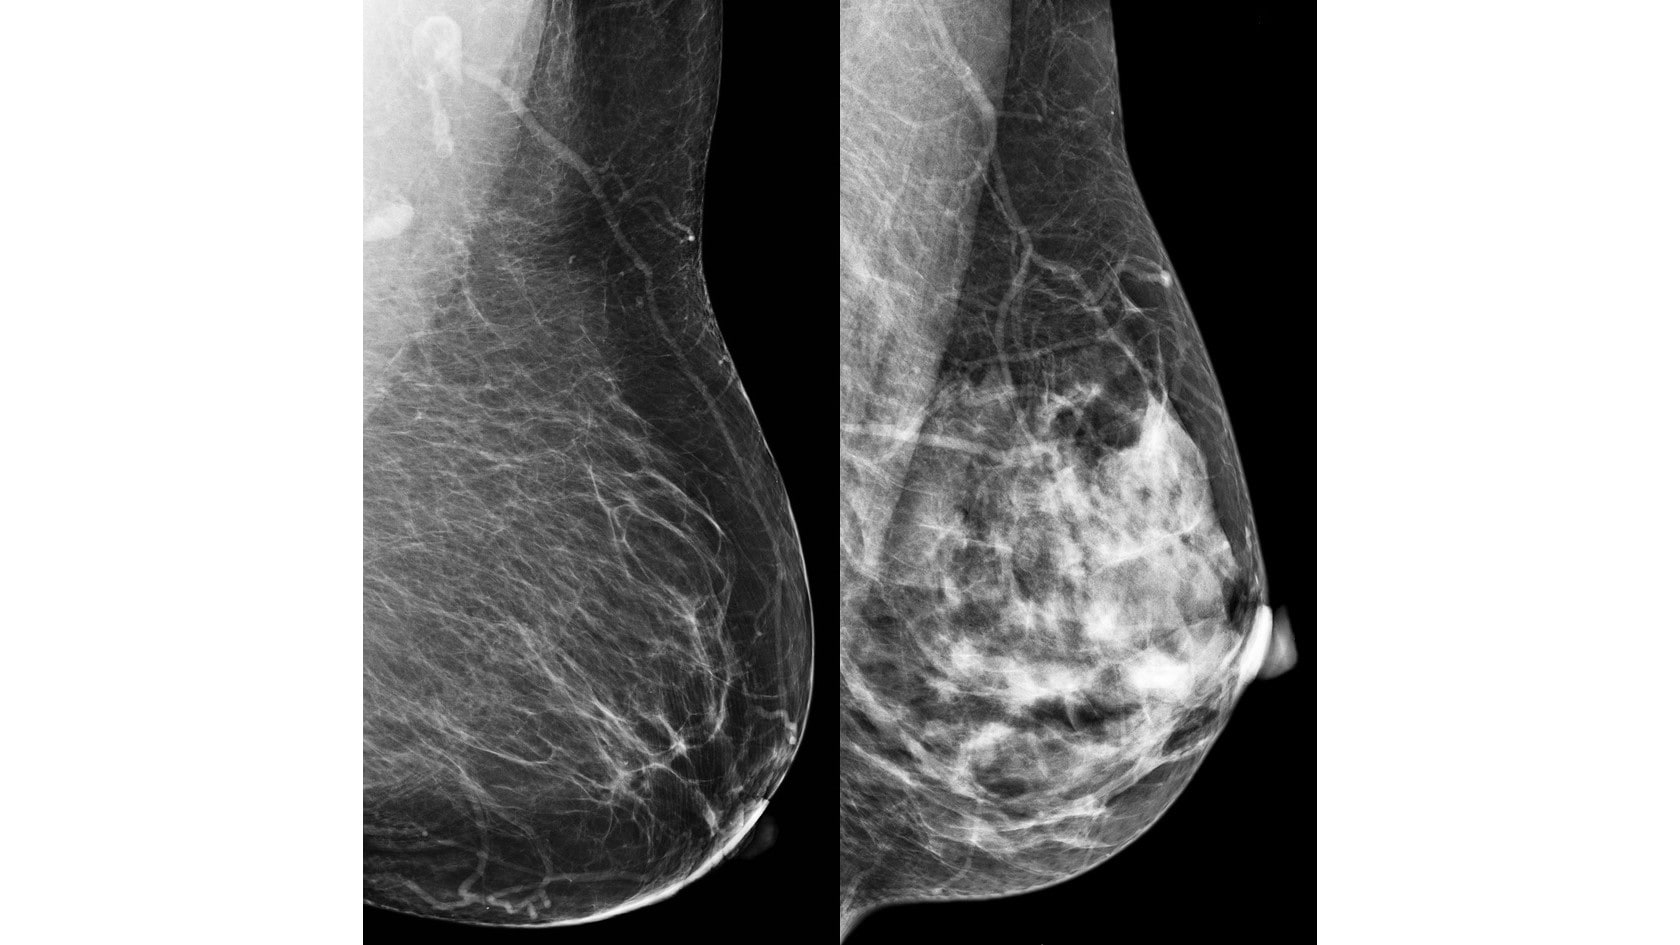 Two mammograms showing a fatty breast and a dense breast